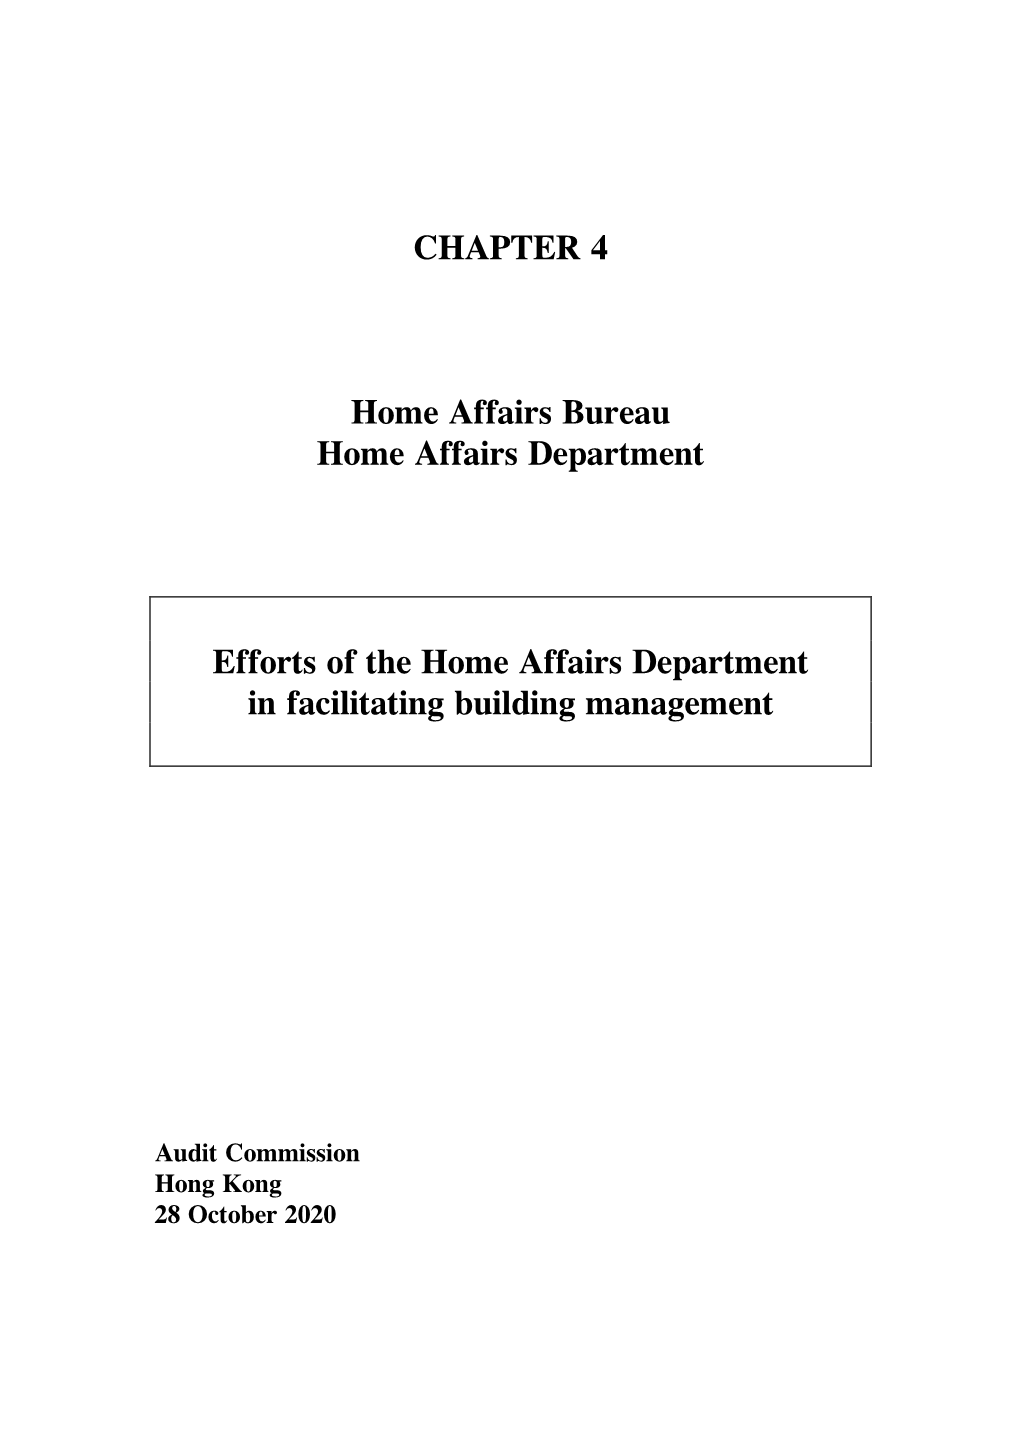 CHAPTER 4 Home Affairs Bureau Home Affairs Department Efforts Of